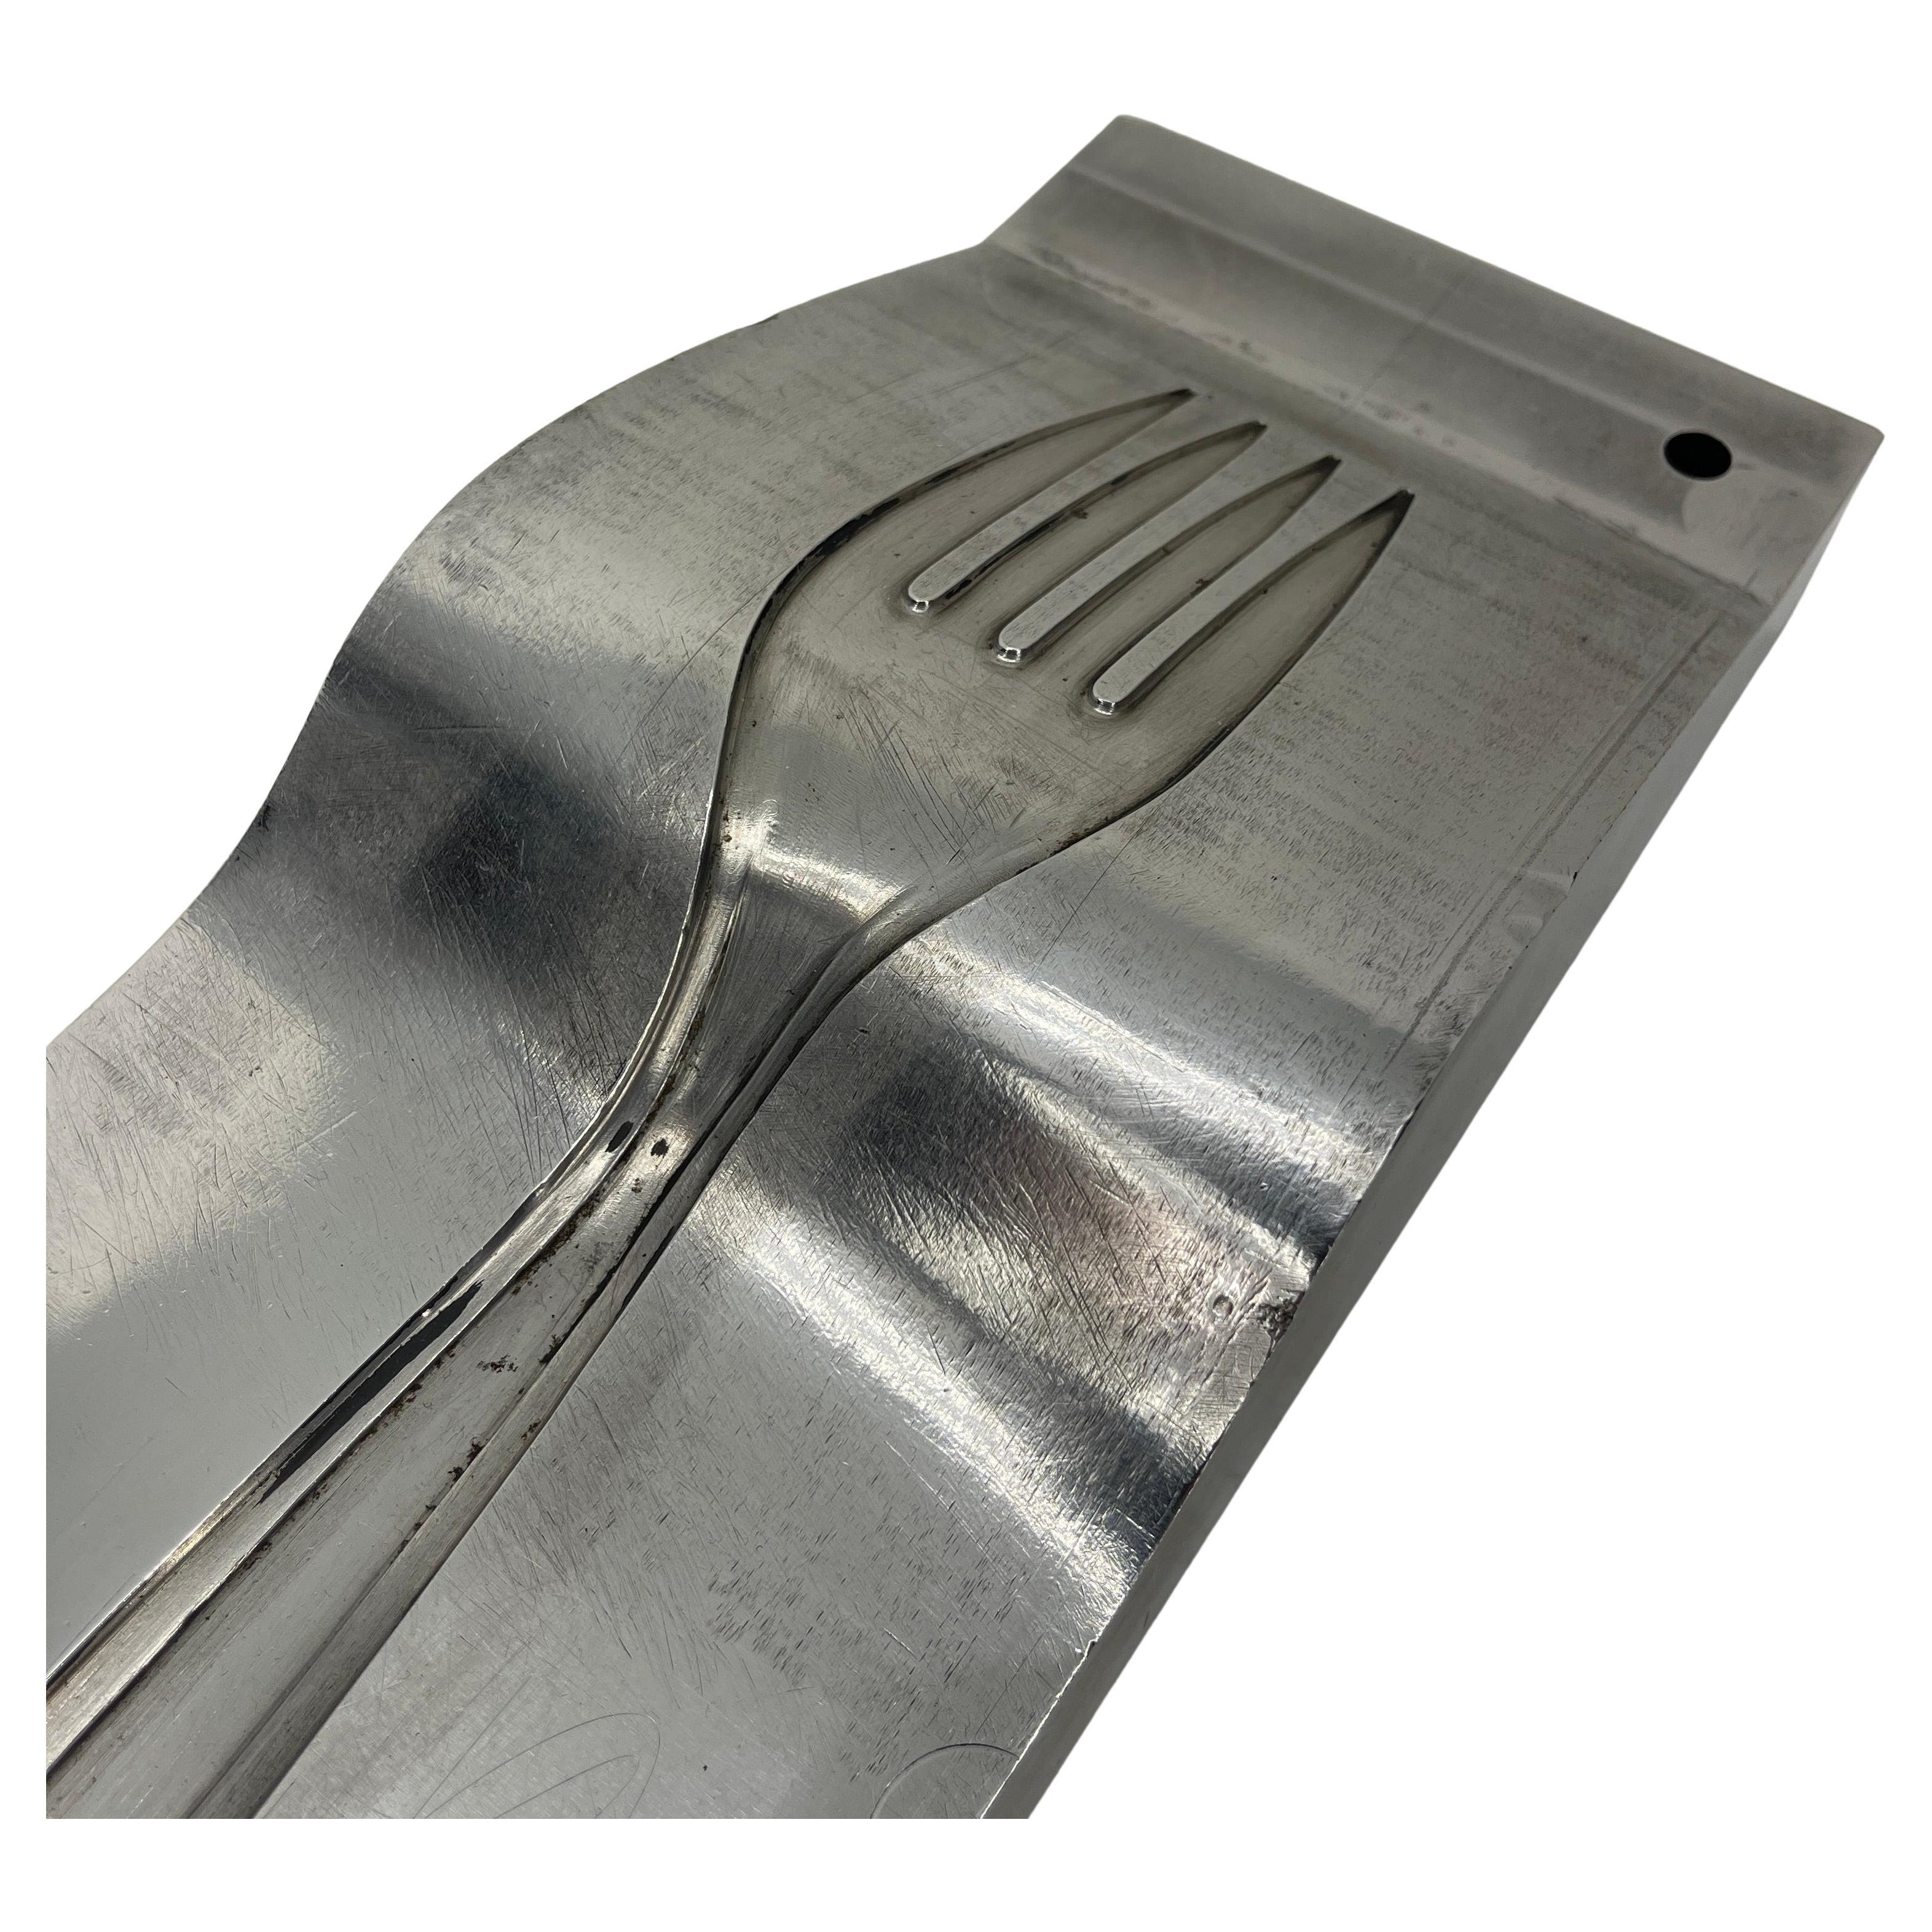 Large Stainless Steel Industrial Fork Mold Sculpture for Silverware In Good Condition For Sale In Haddonfield, NJ